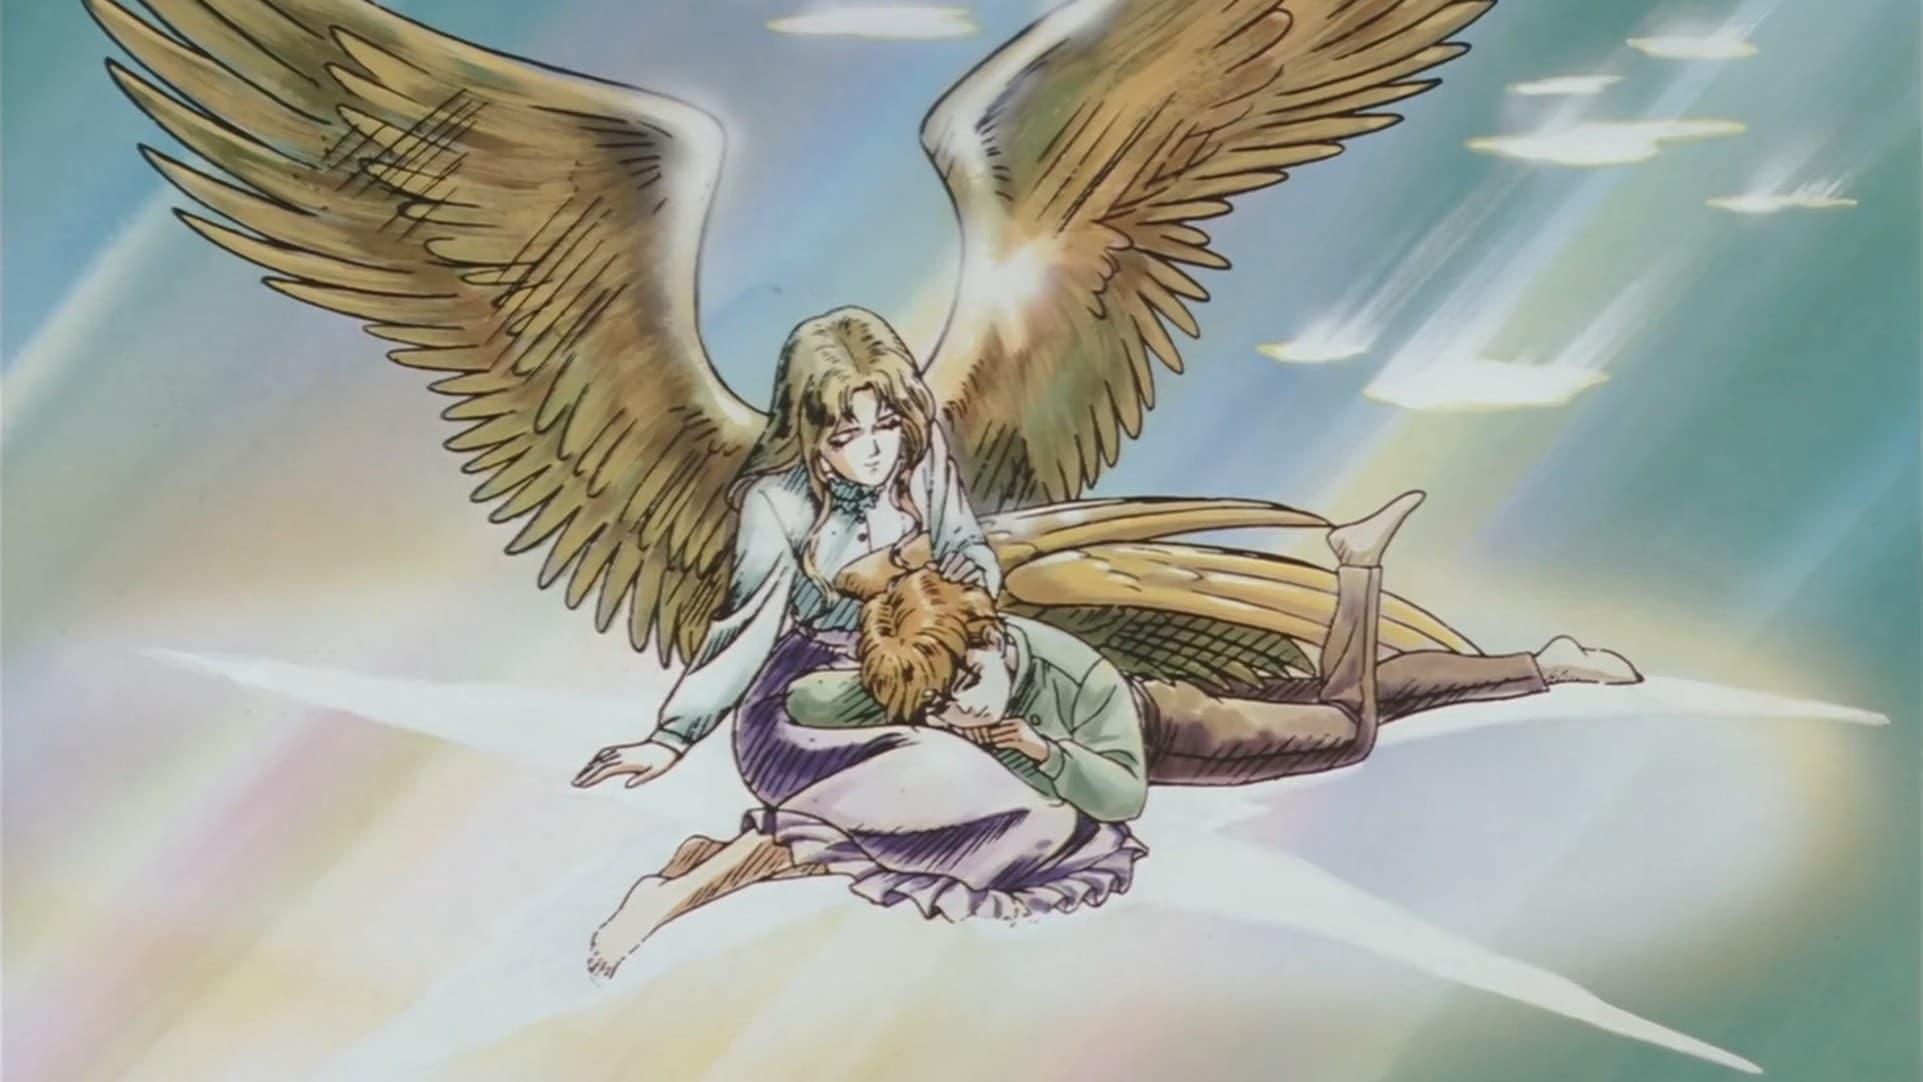 Legend of the Galactic Heroes: Golden Wings backdrop